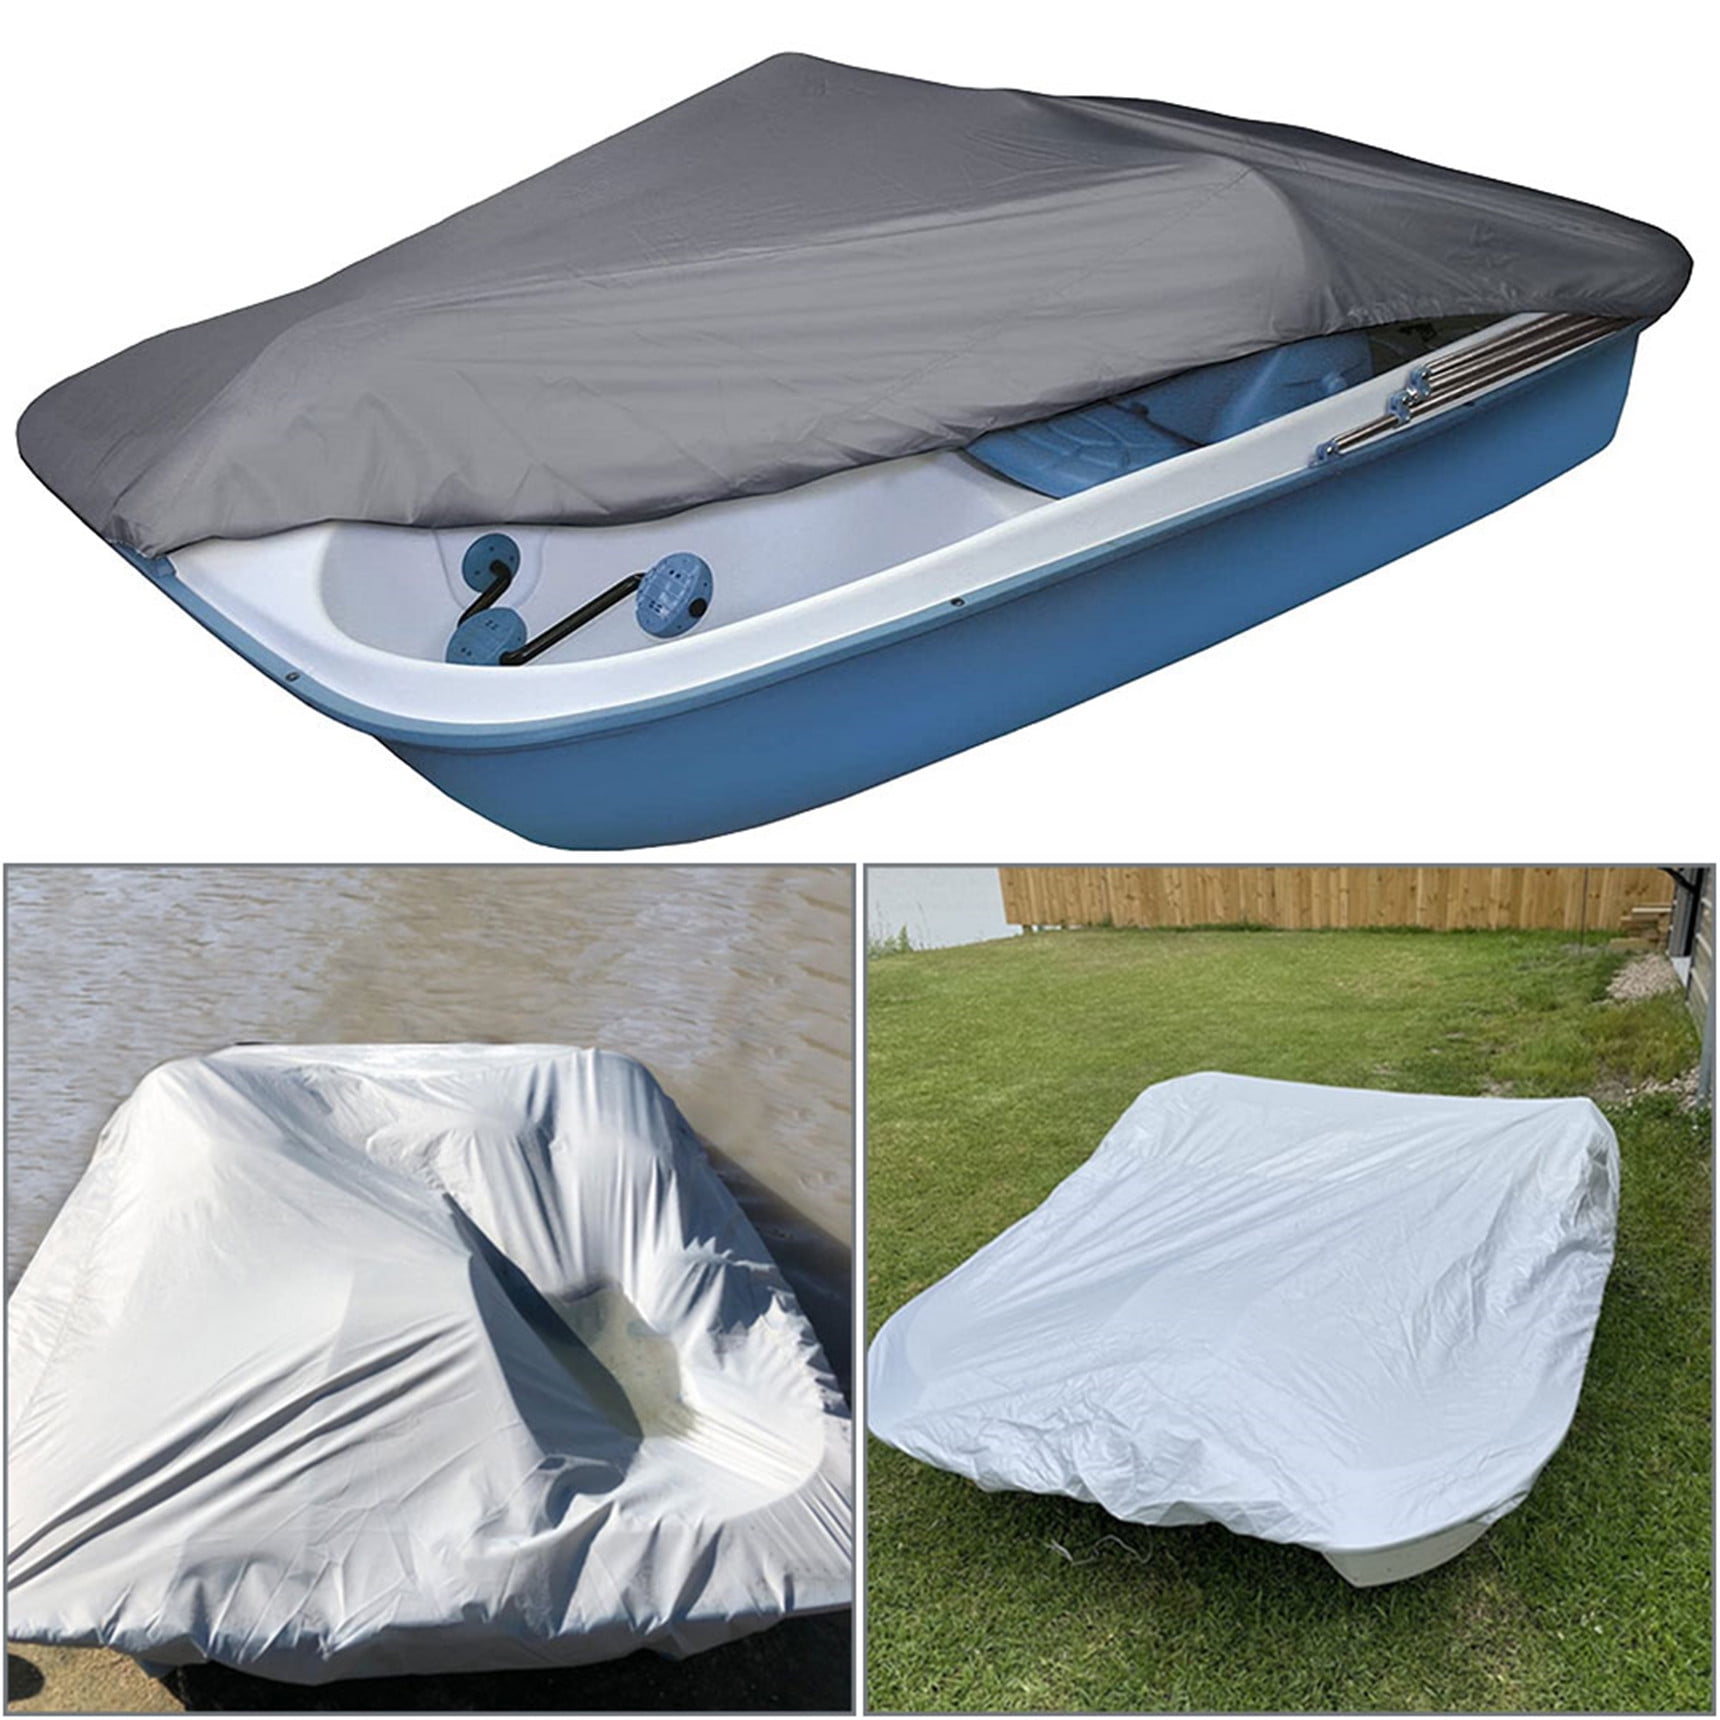 Pedal Boat Cover Waterproof Heavy Duty 3 or 5 Person Paddle Boat Protector  Replacement for Pedal Boat Pelican Boat Monaco Boat 115 L x 80 W Grey